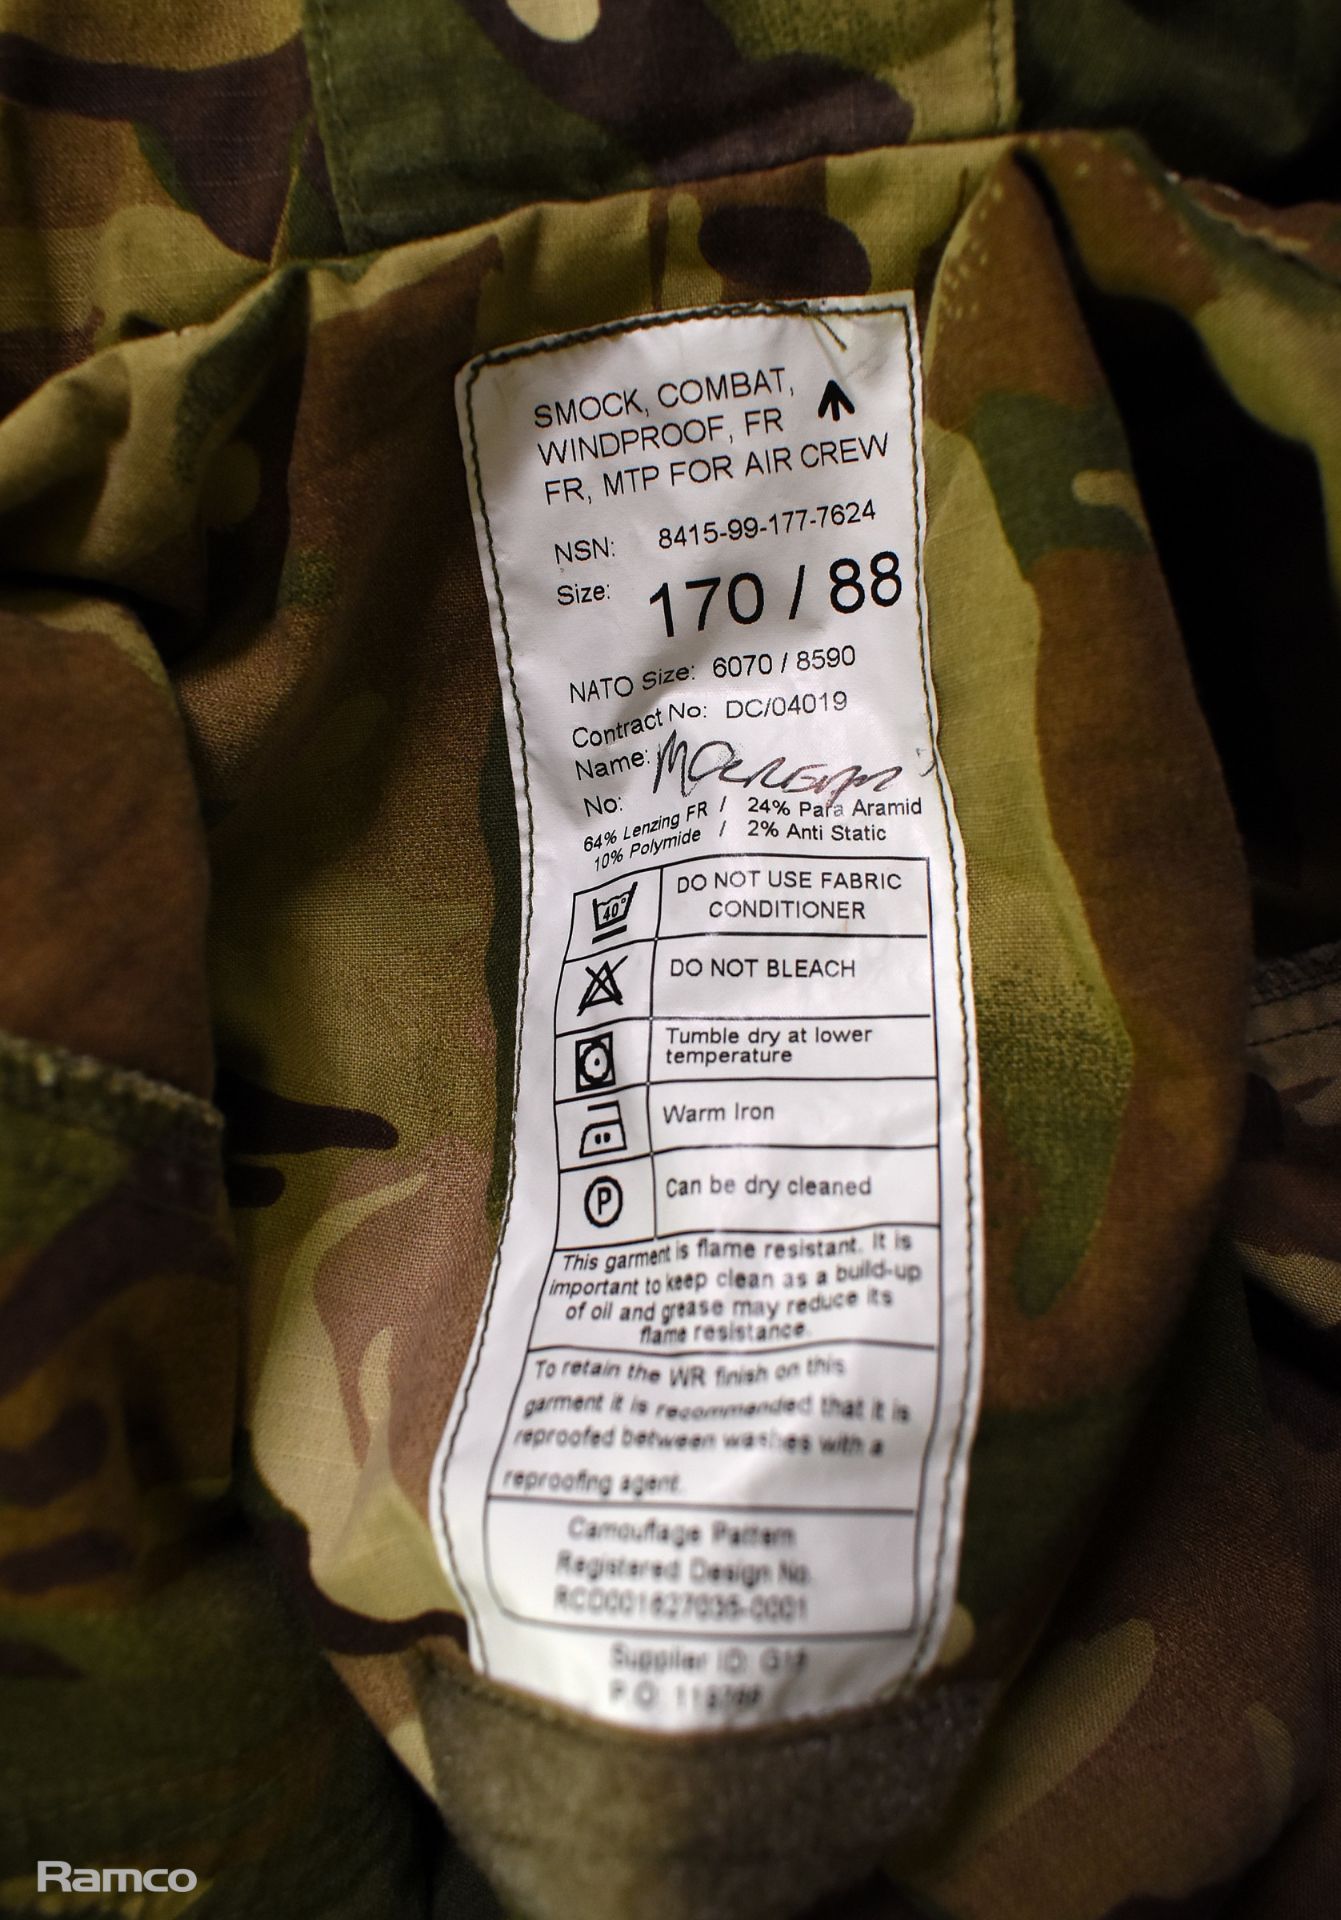 50x British Army MTP windproof smocks - mixed grades and sizes - Image 9 of 9